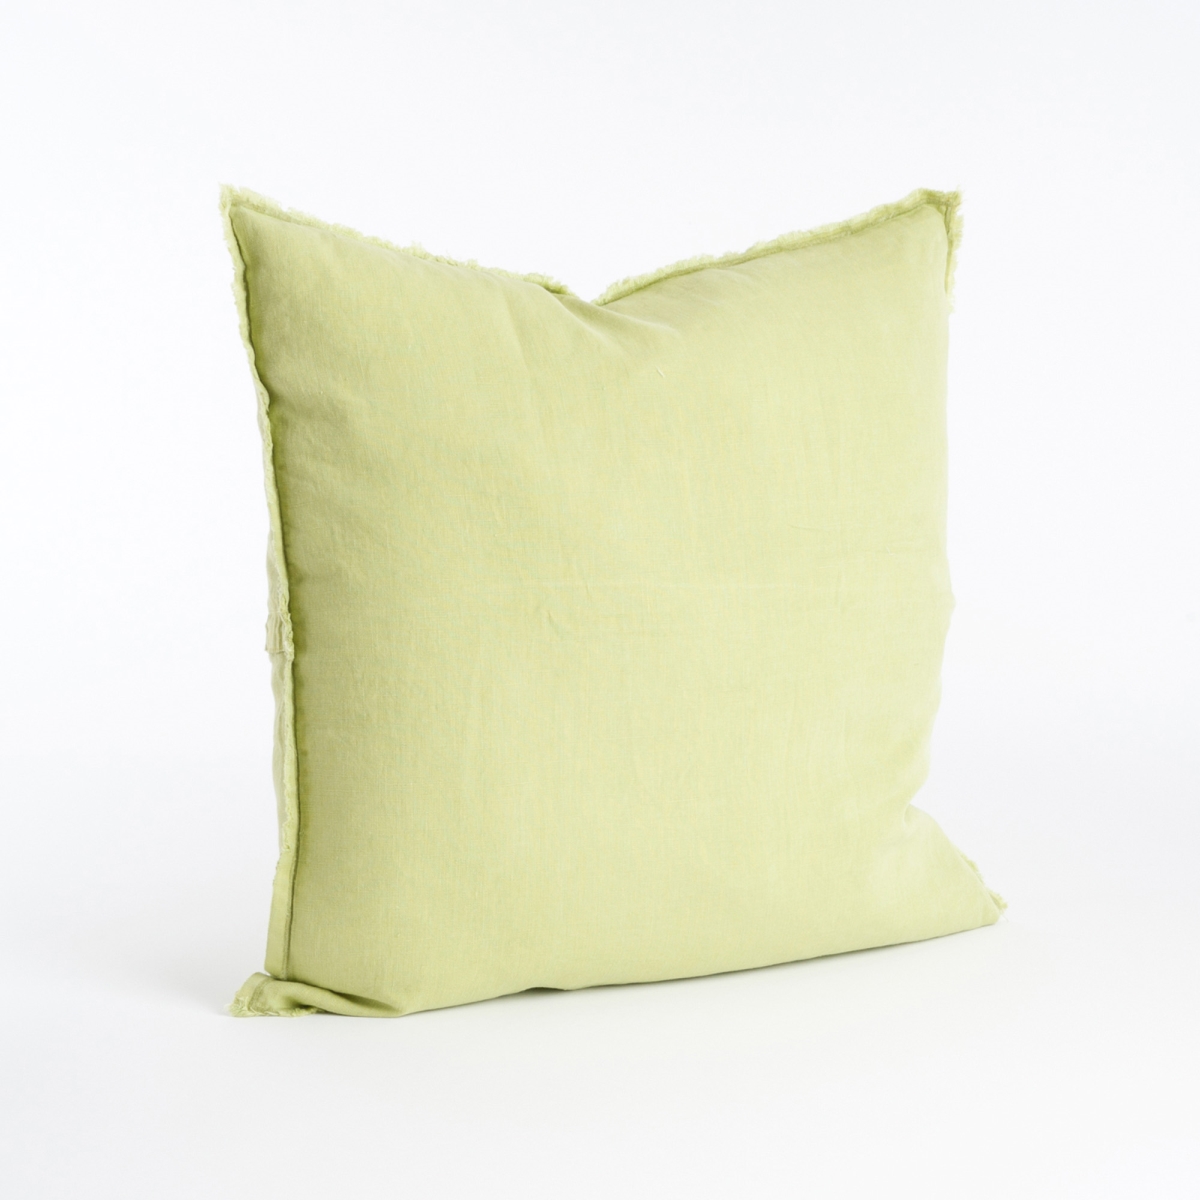 RLM Distribution SARO  20 in. Square Fringed Design Linen Down Filled Pillow - Chartreuse